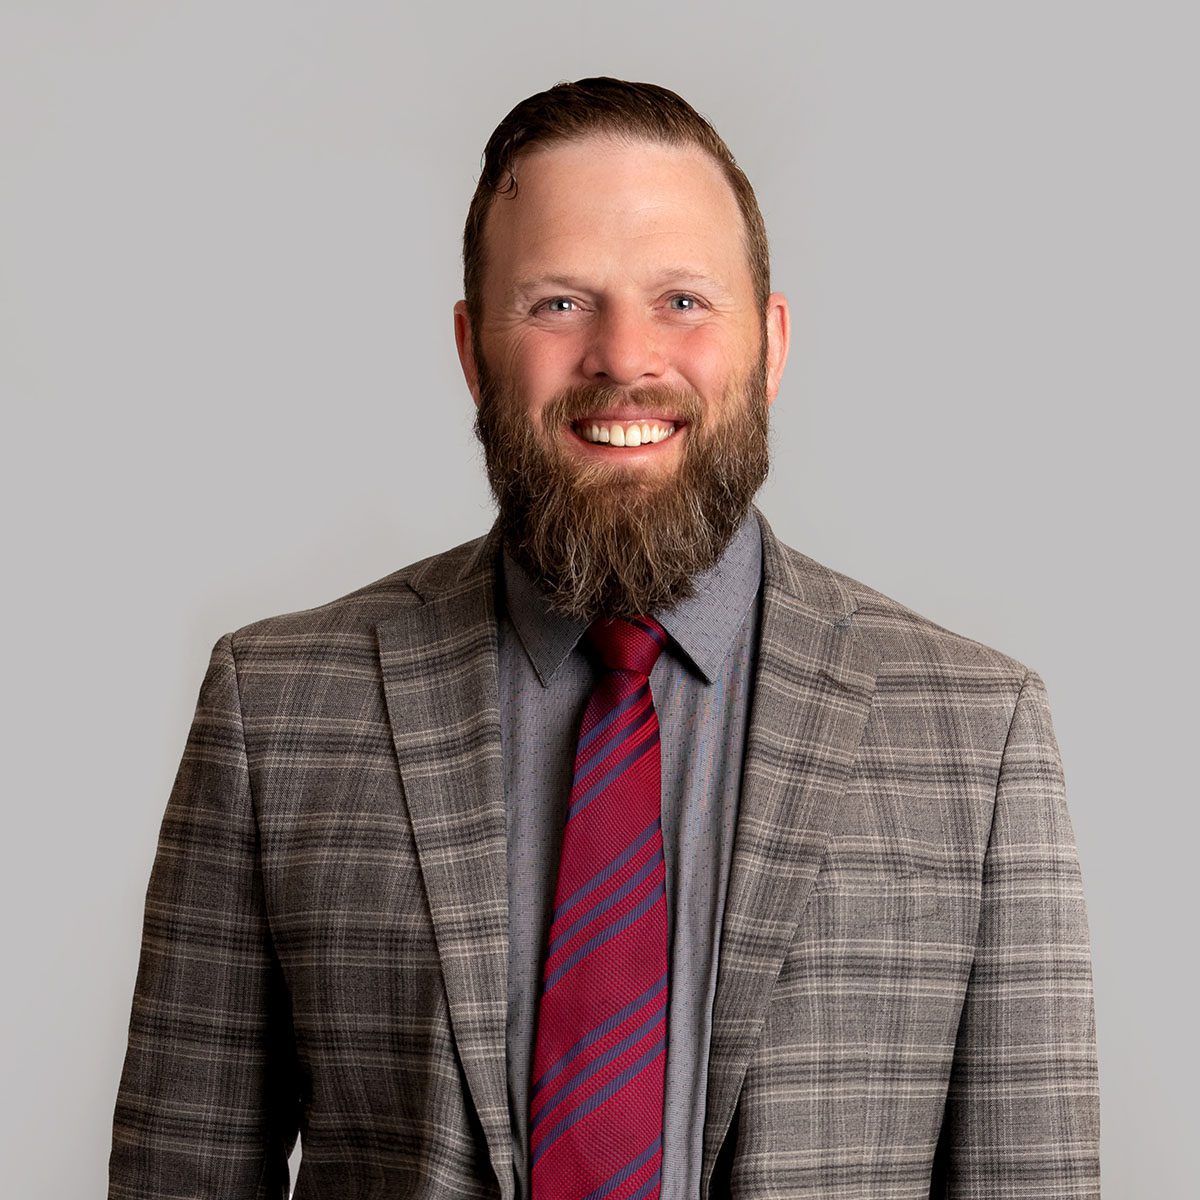 A person with short brown hair and brown beard smiles at the camera. He's wearing a grey plaid jacket, a grey shirt, and a red tie with blue stripes.